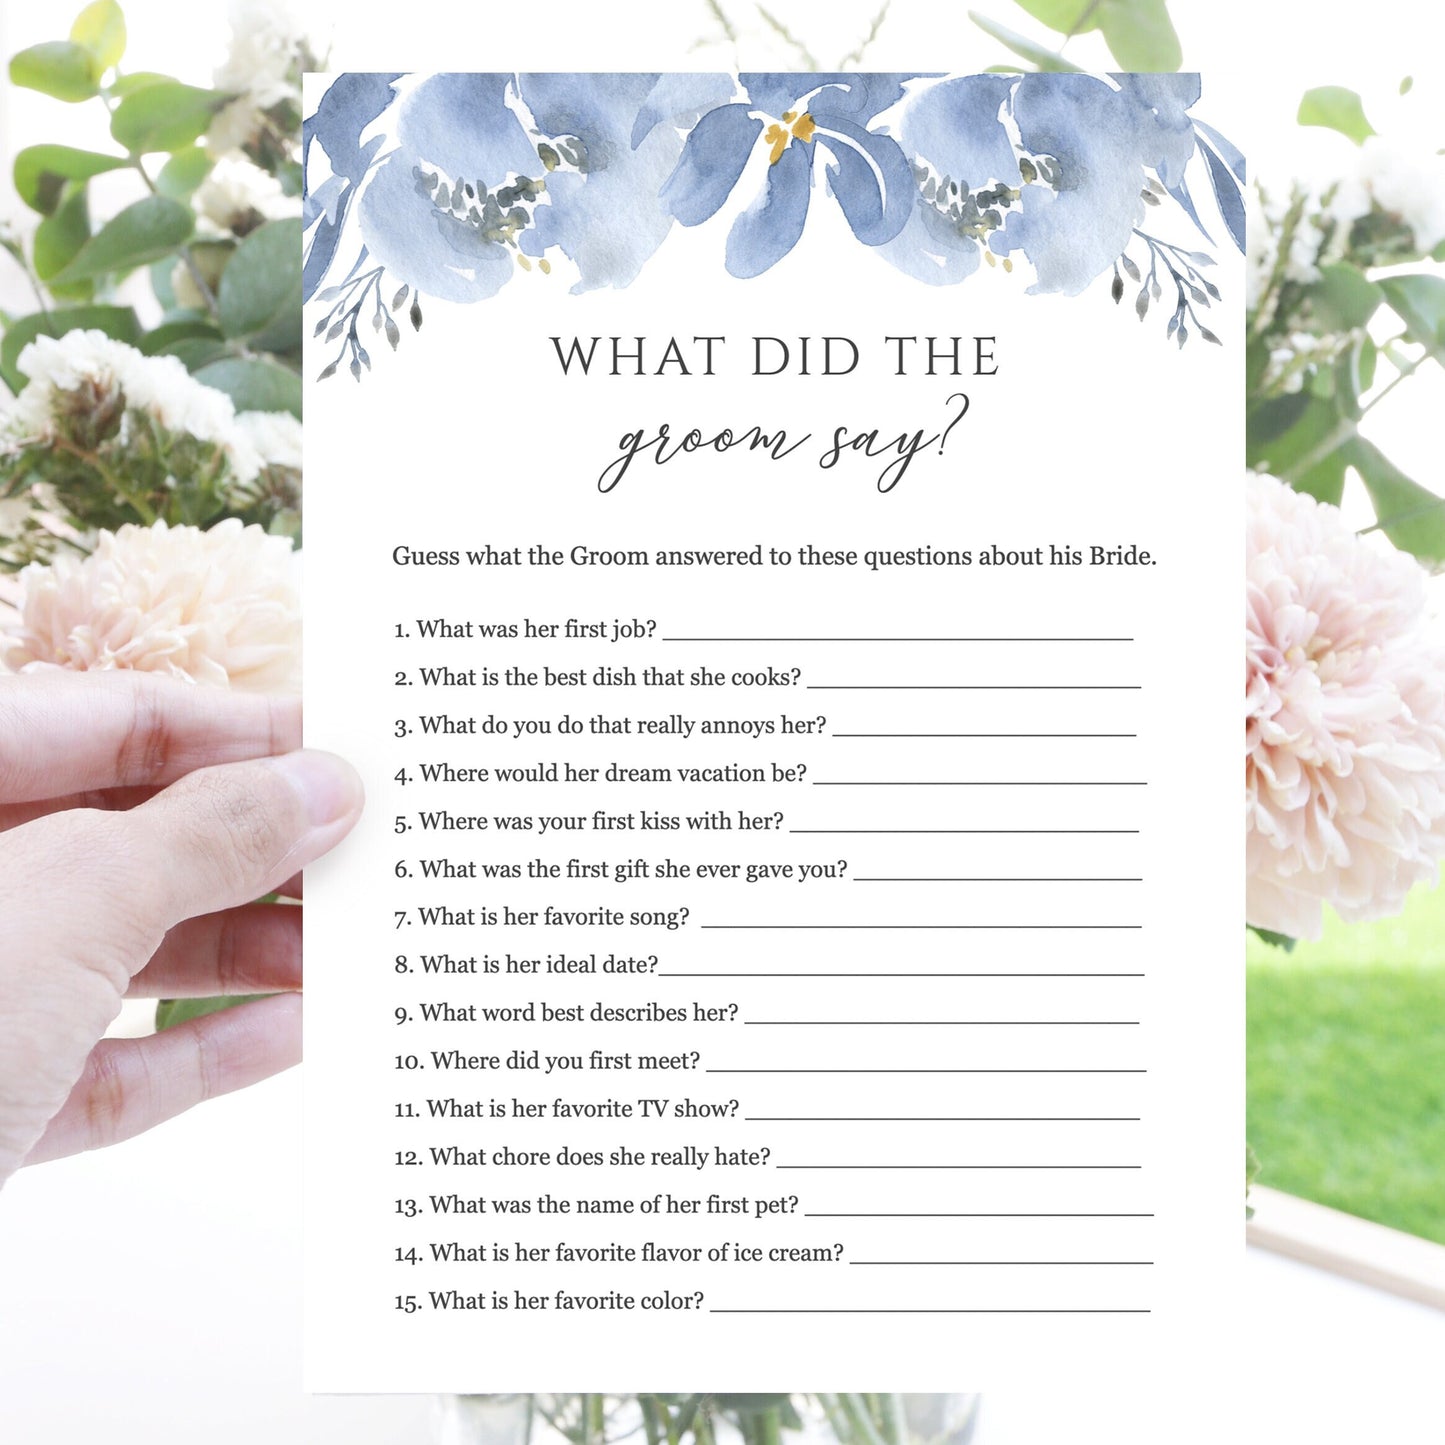 Editable What Did the Groom Say Dusty Blue Gray Bridal Shower Games Wedding Games Template